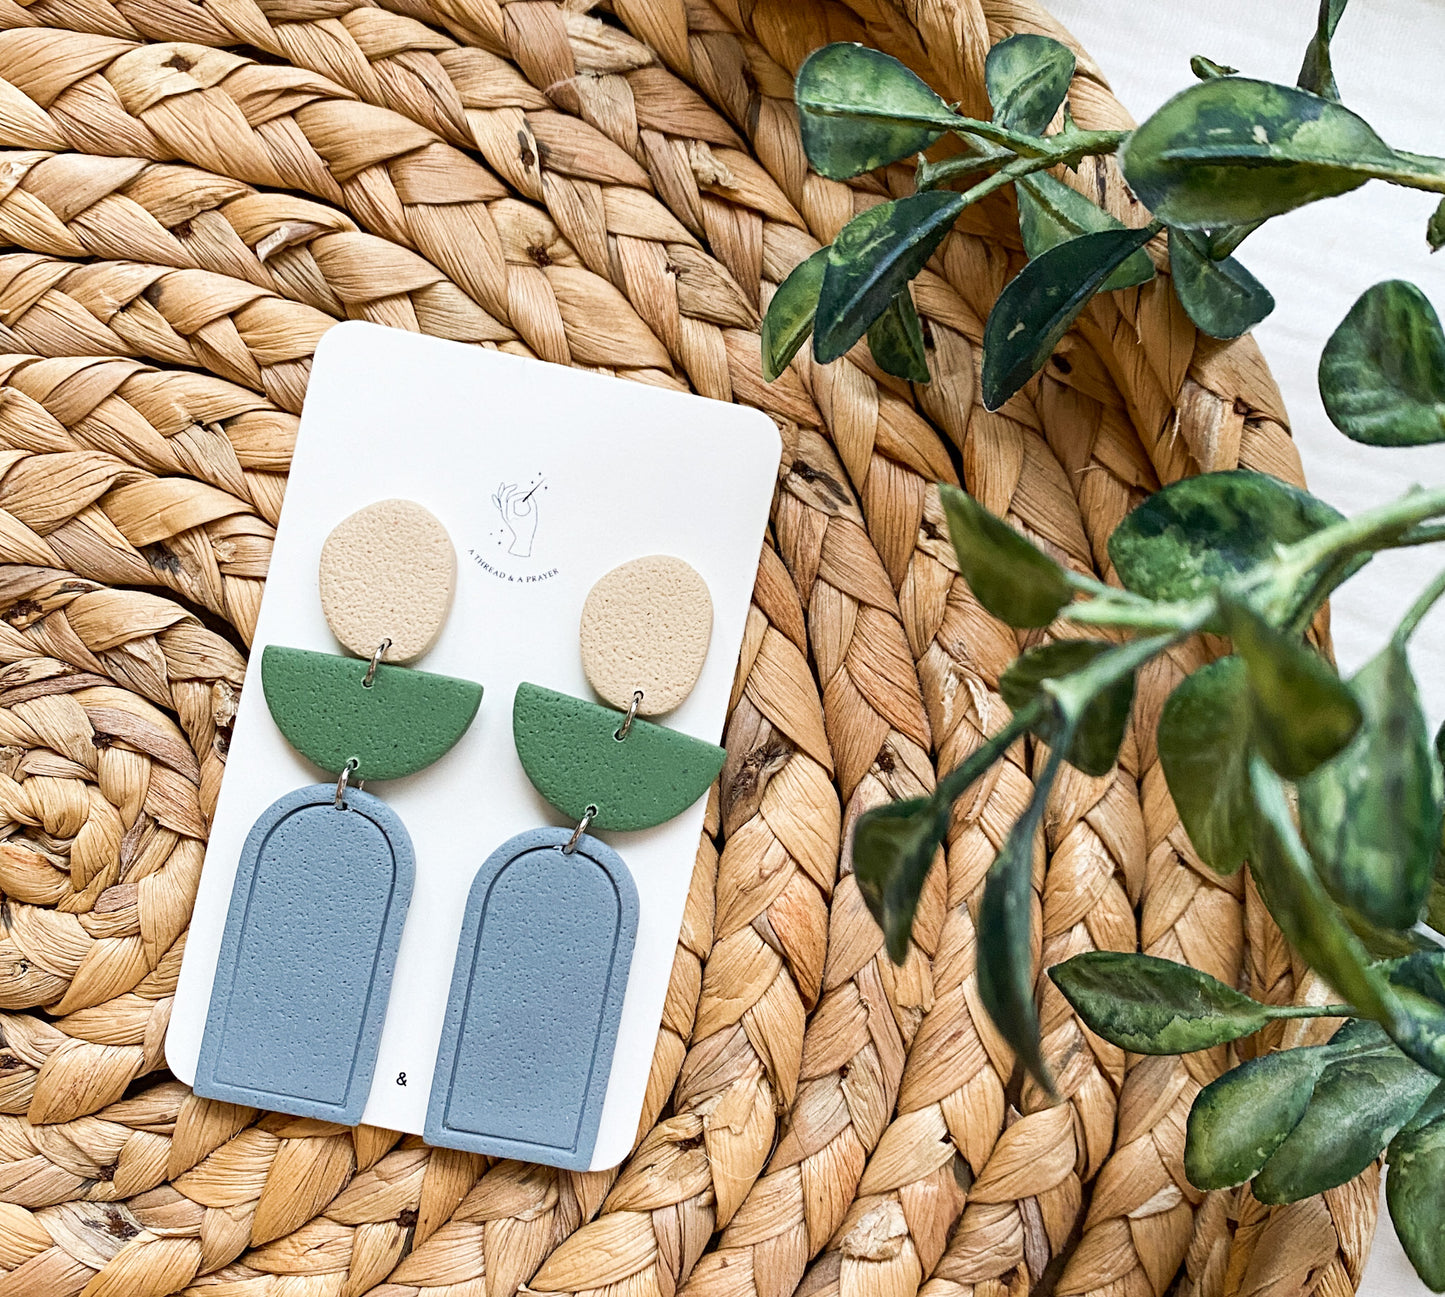 Textured Stone Blue, Green and Ivory Clay Earrings | Polymer Clay | Handmade | Neutral | Dangle | Spring Earrings | Organic Shape